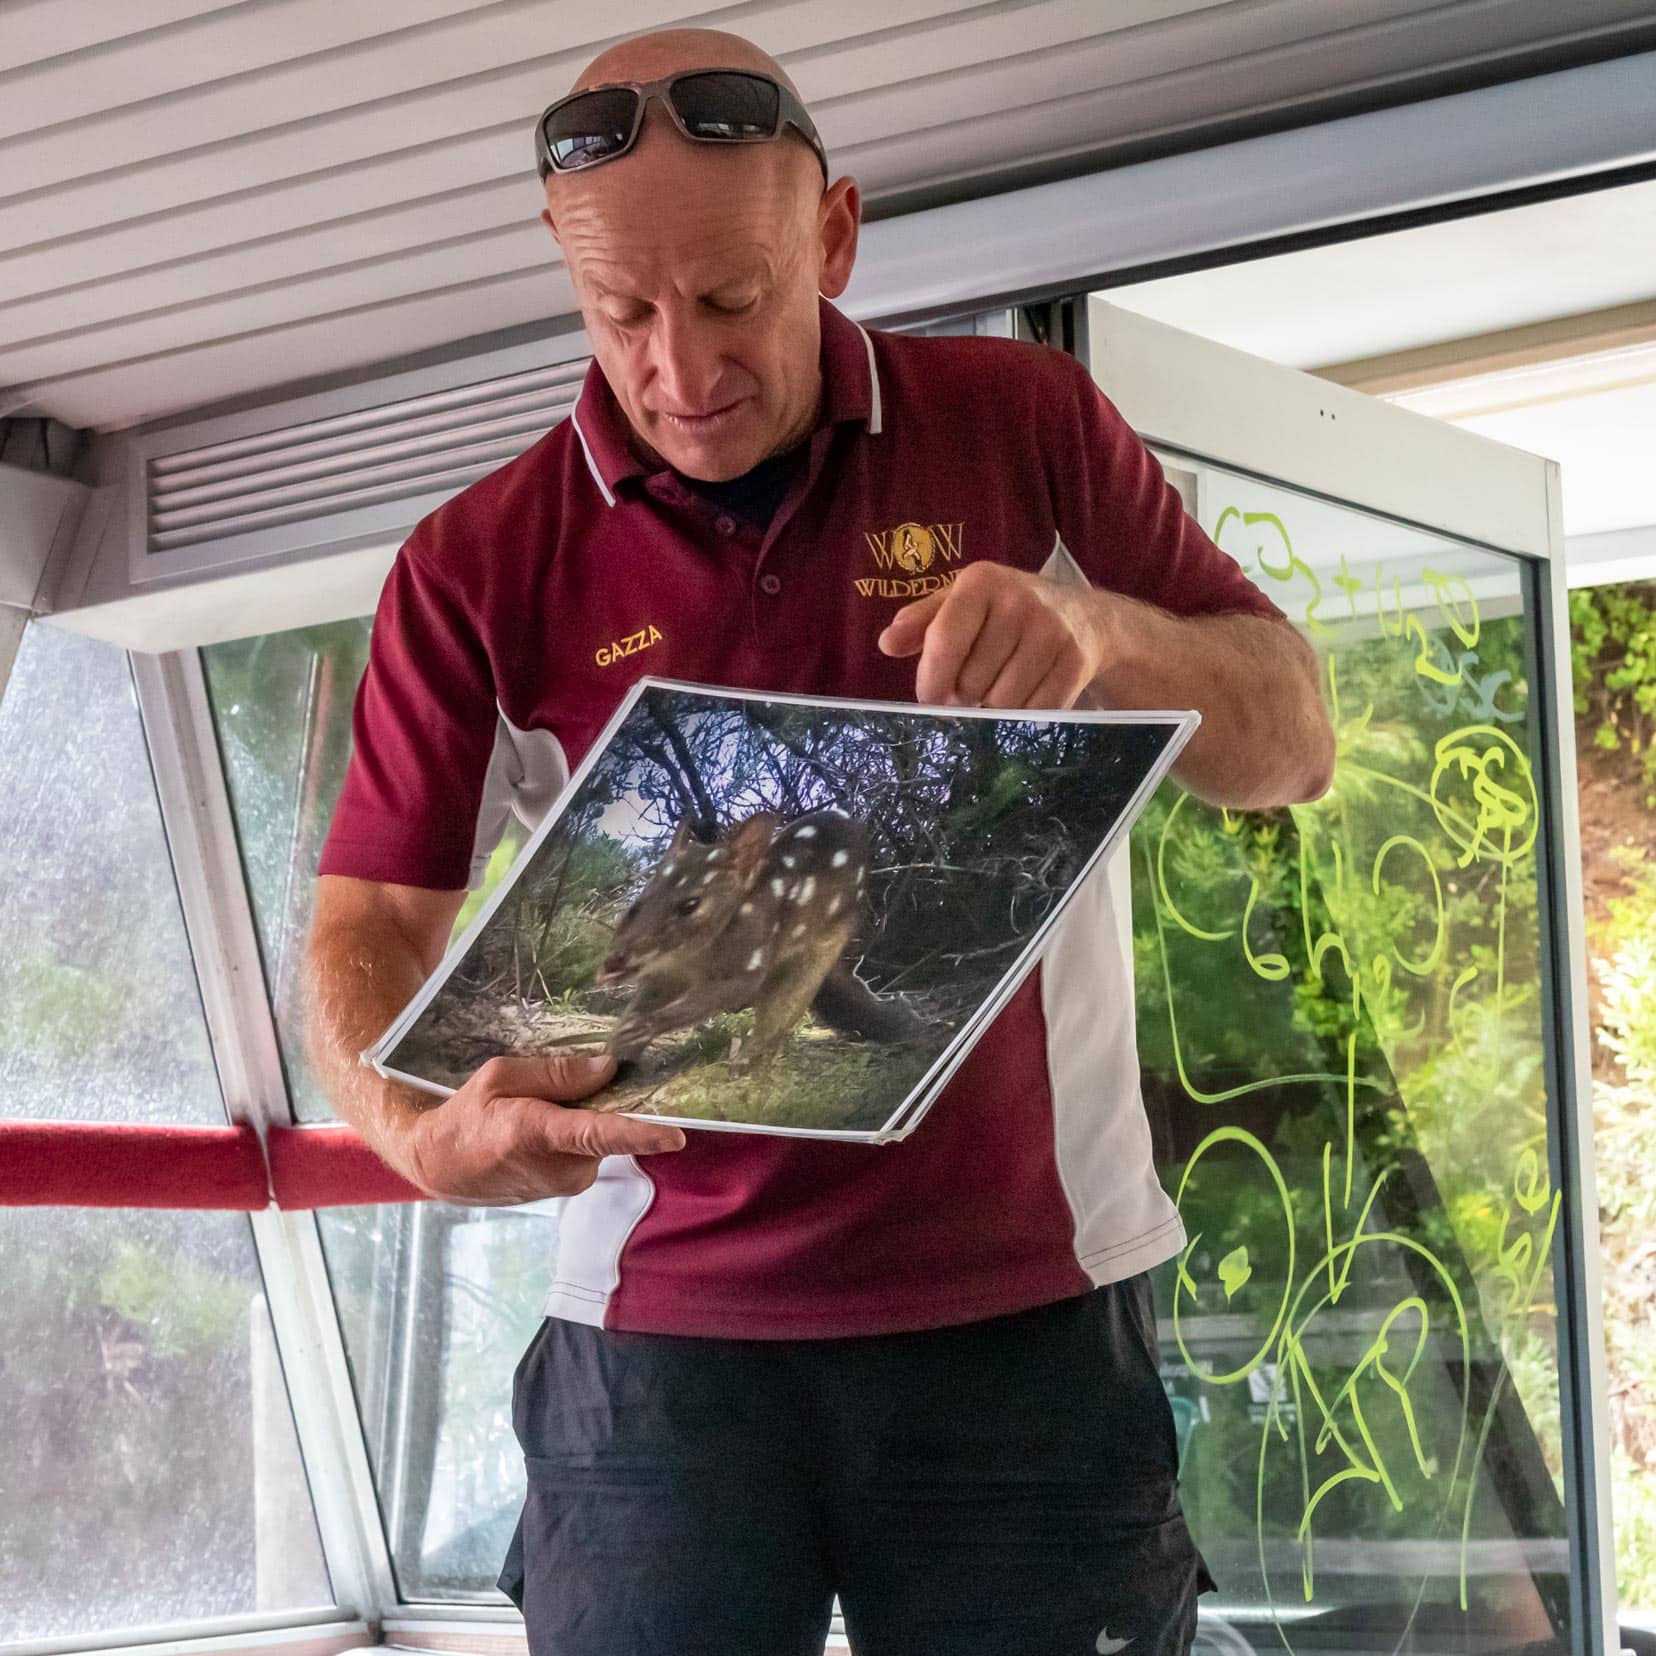 Gary showing us a photo of the western quokka caught on the trap camera 